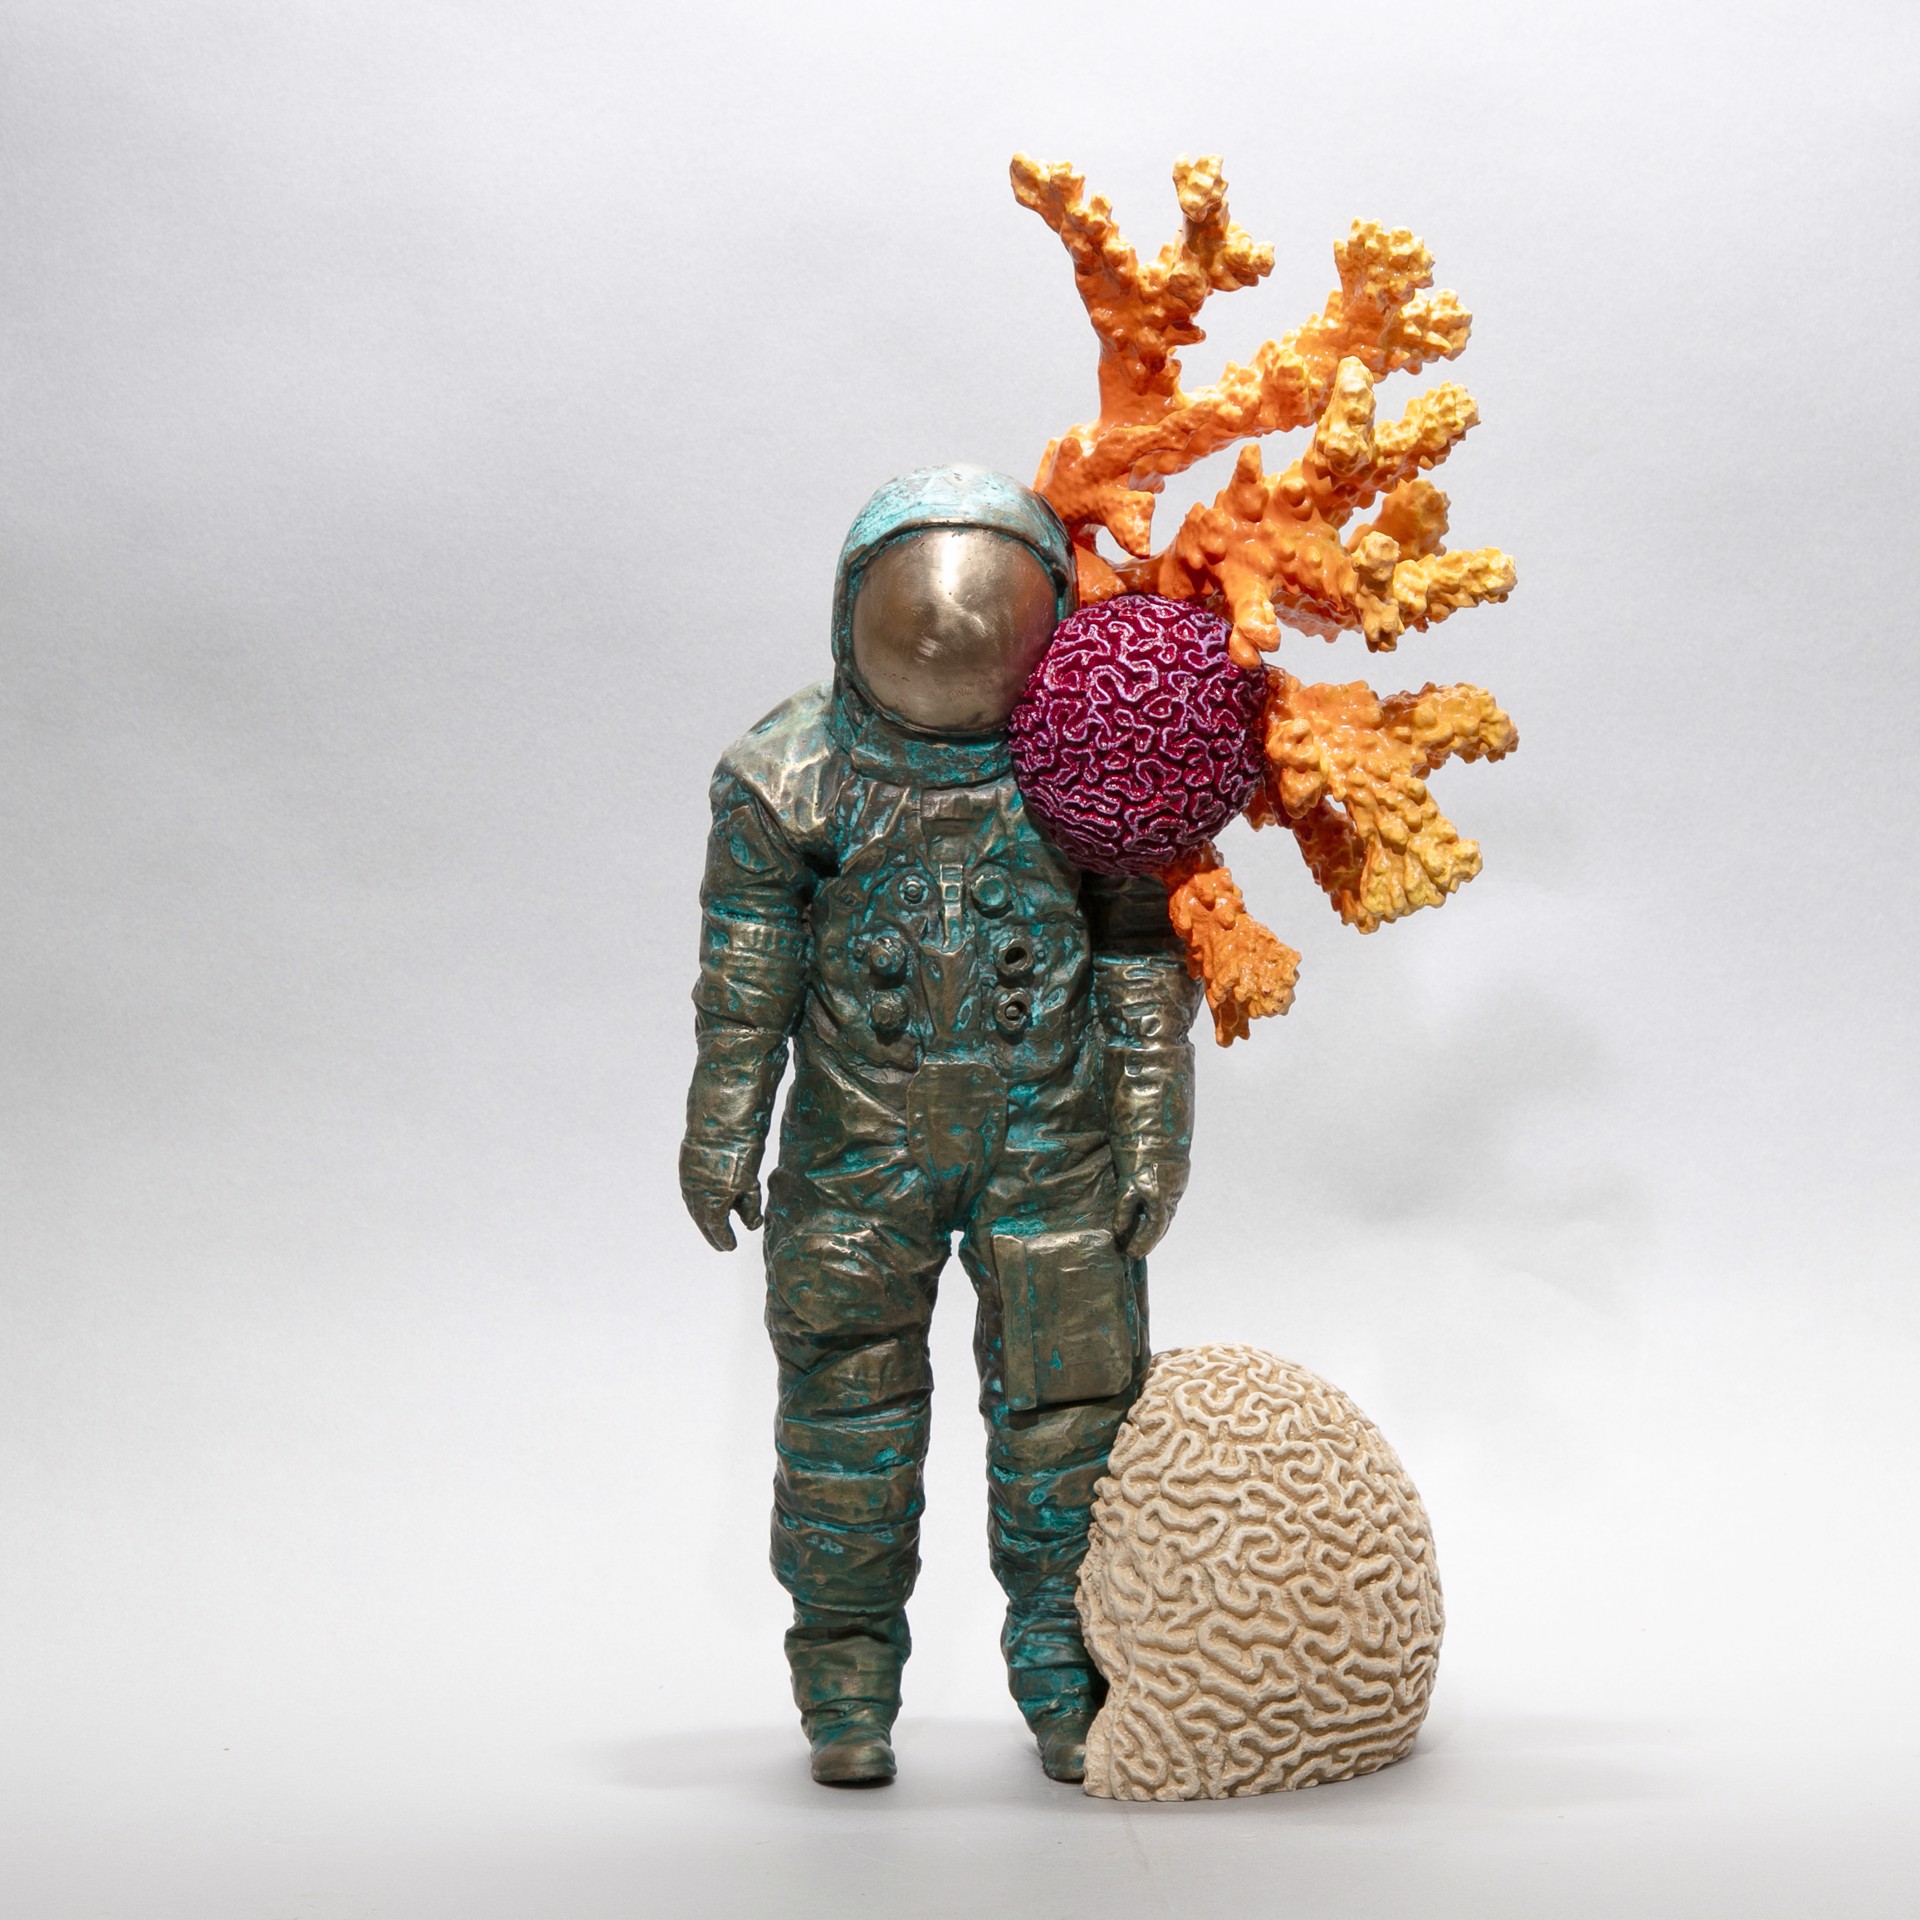 "Spaceman Coral 3" by Dana Younger